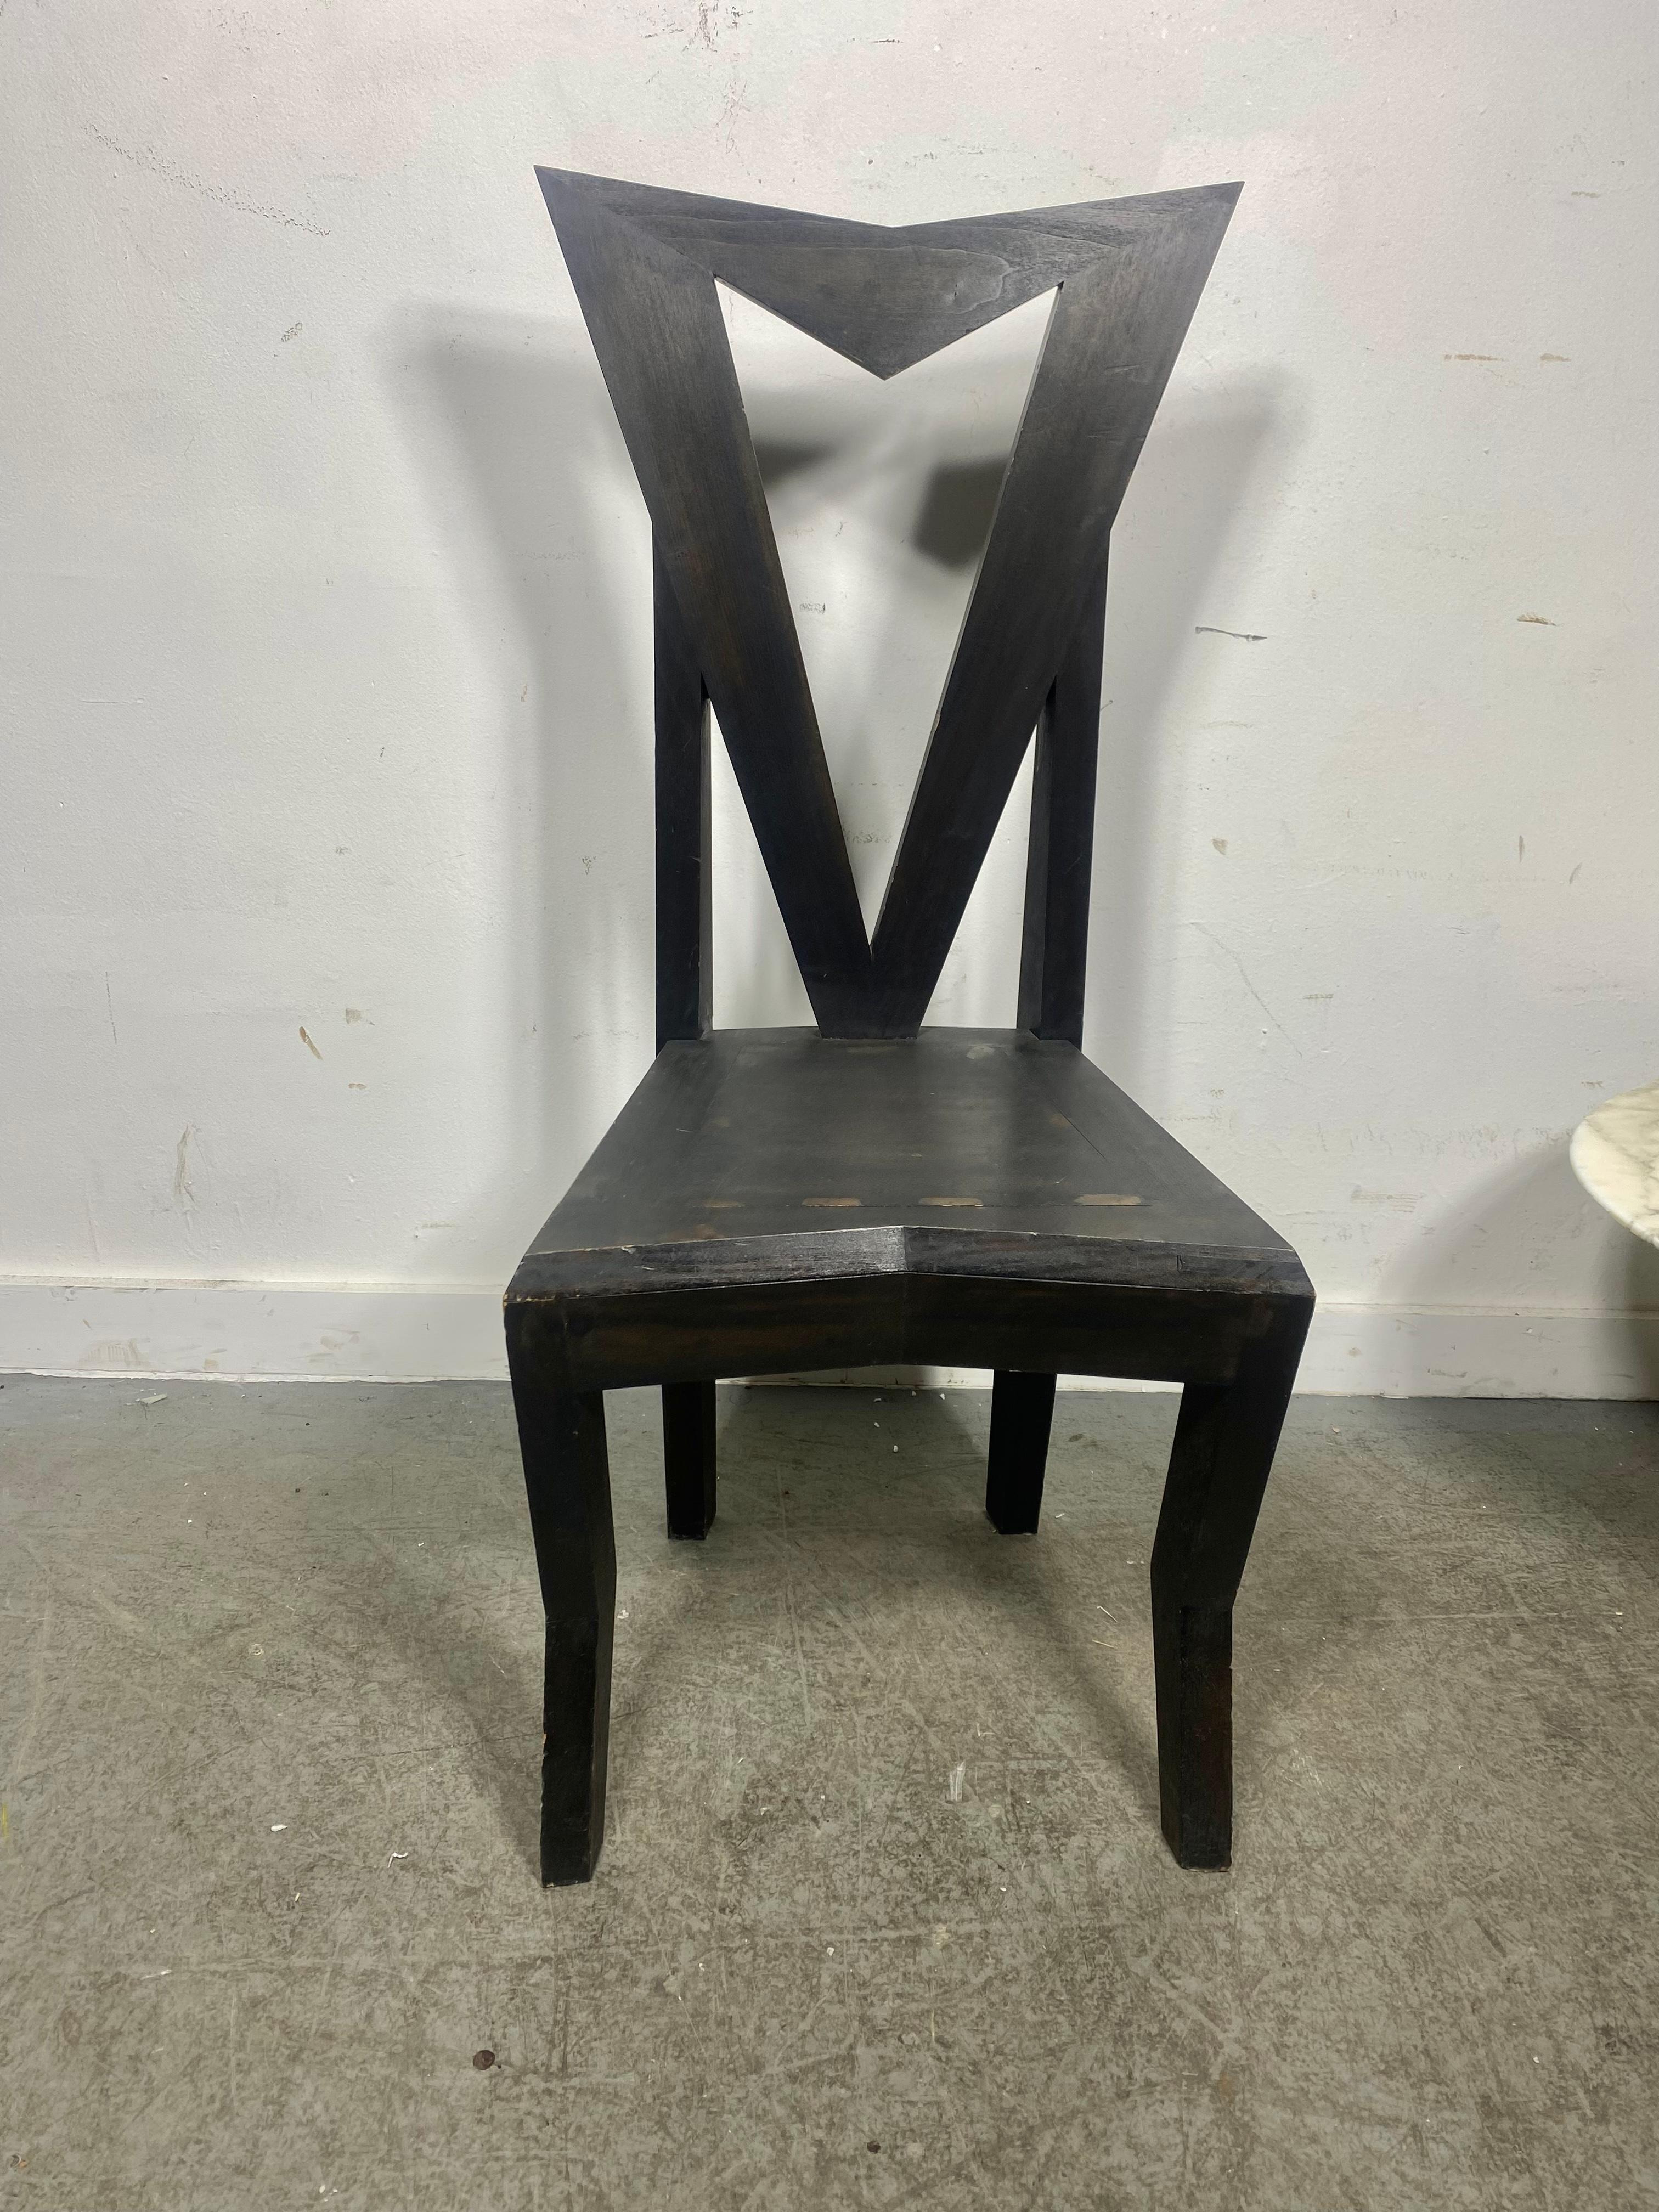 Czech Cubist Side Chair design by Pavel Janak for Modernista In Good Condition For Sale In Buffalo, NY